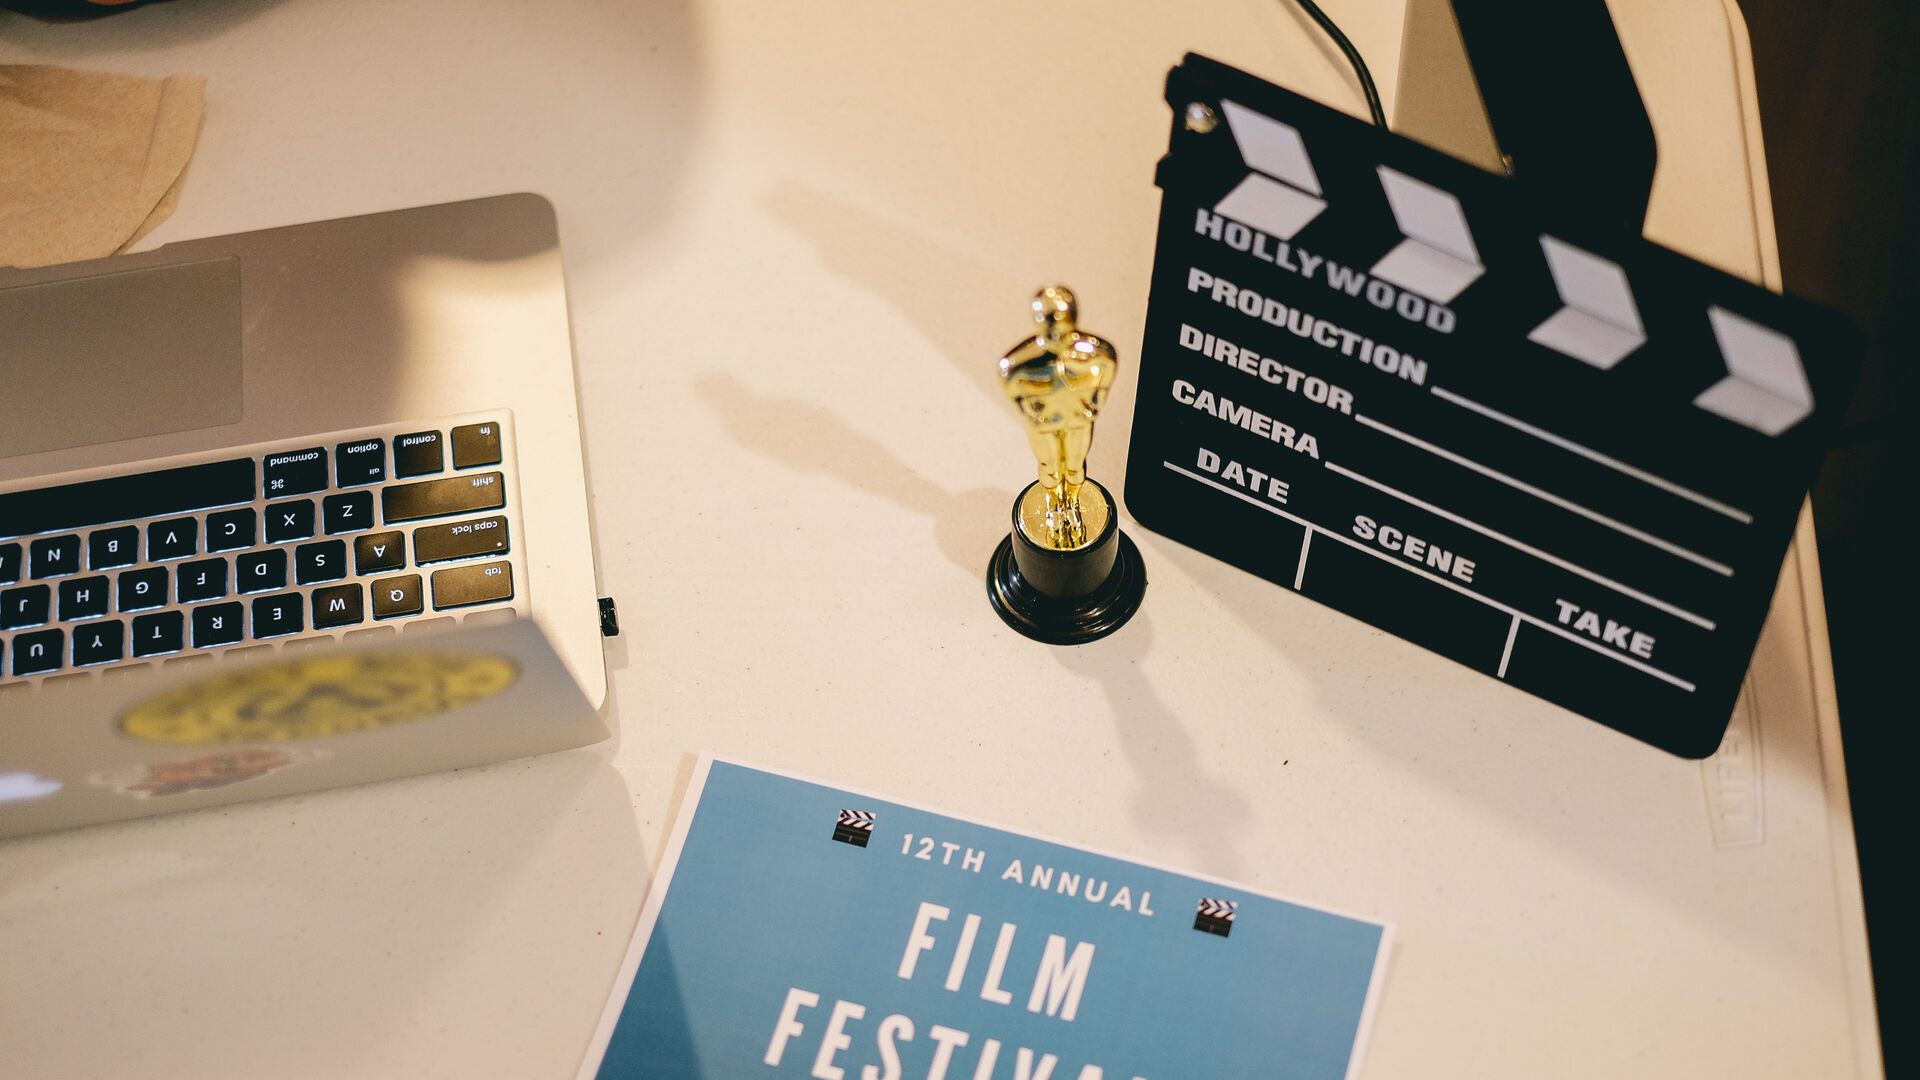 Table set-up with oscar replica, clapperboard, laptop and film festival flyer.